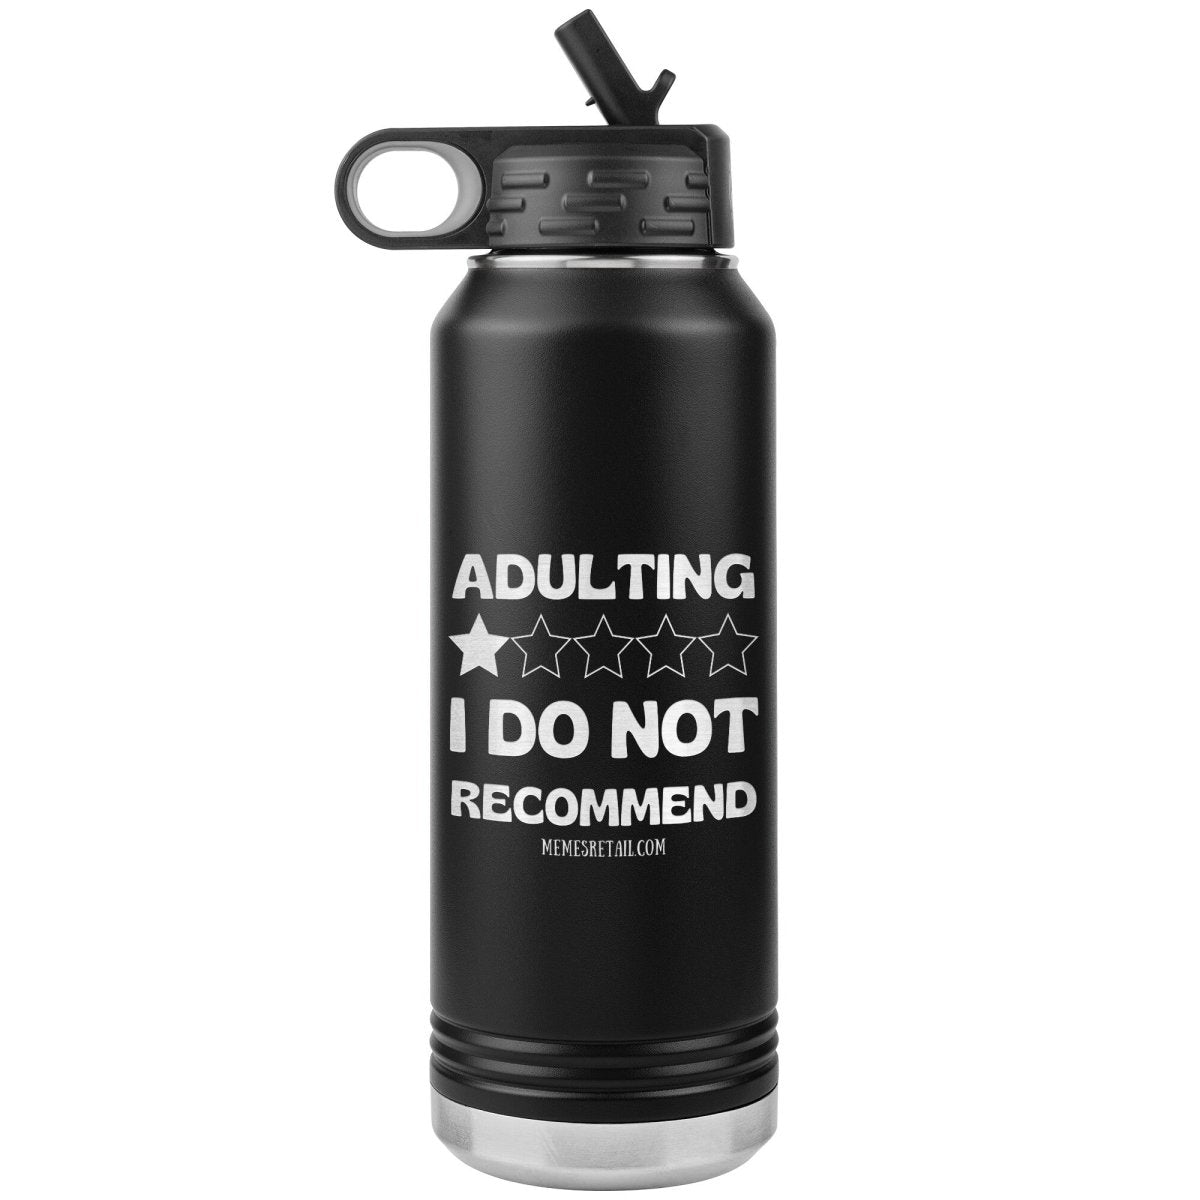 Adulting, 1 Star, I do not recommend 32oz Water Tumblers, Black - MemesRetail.com